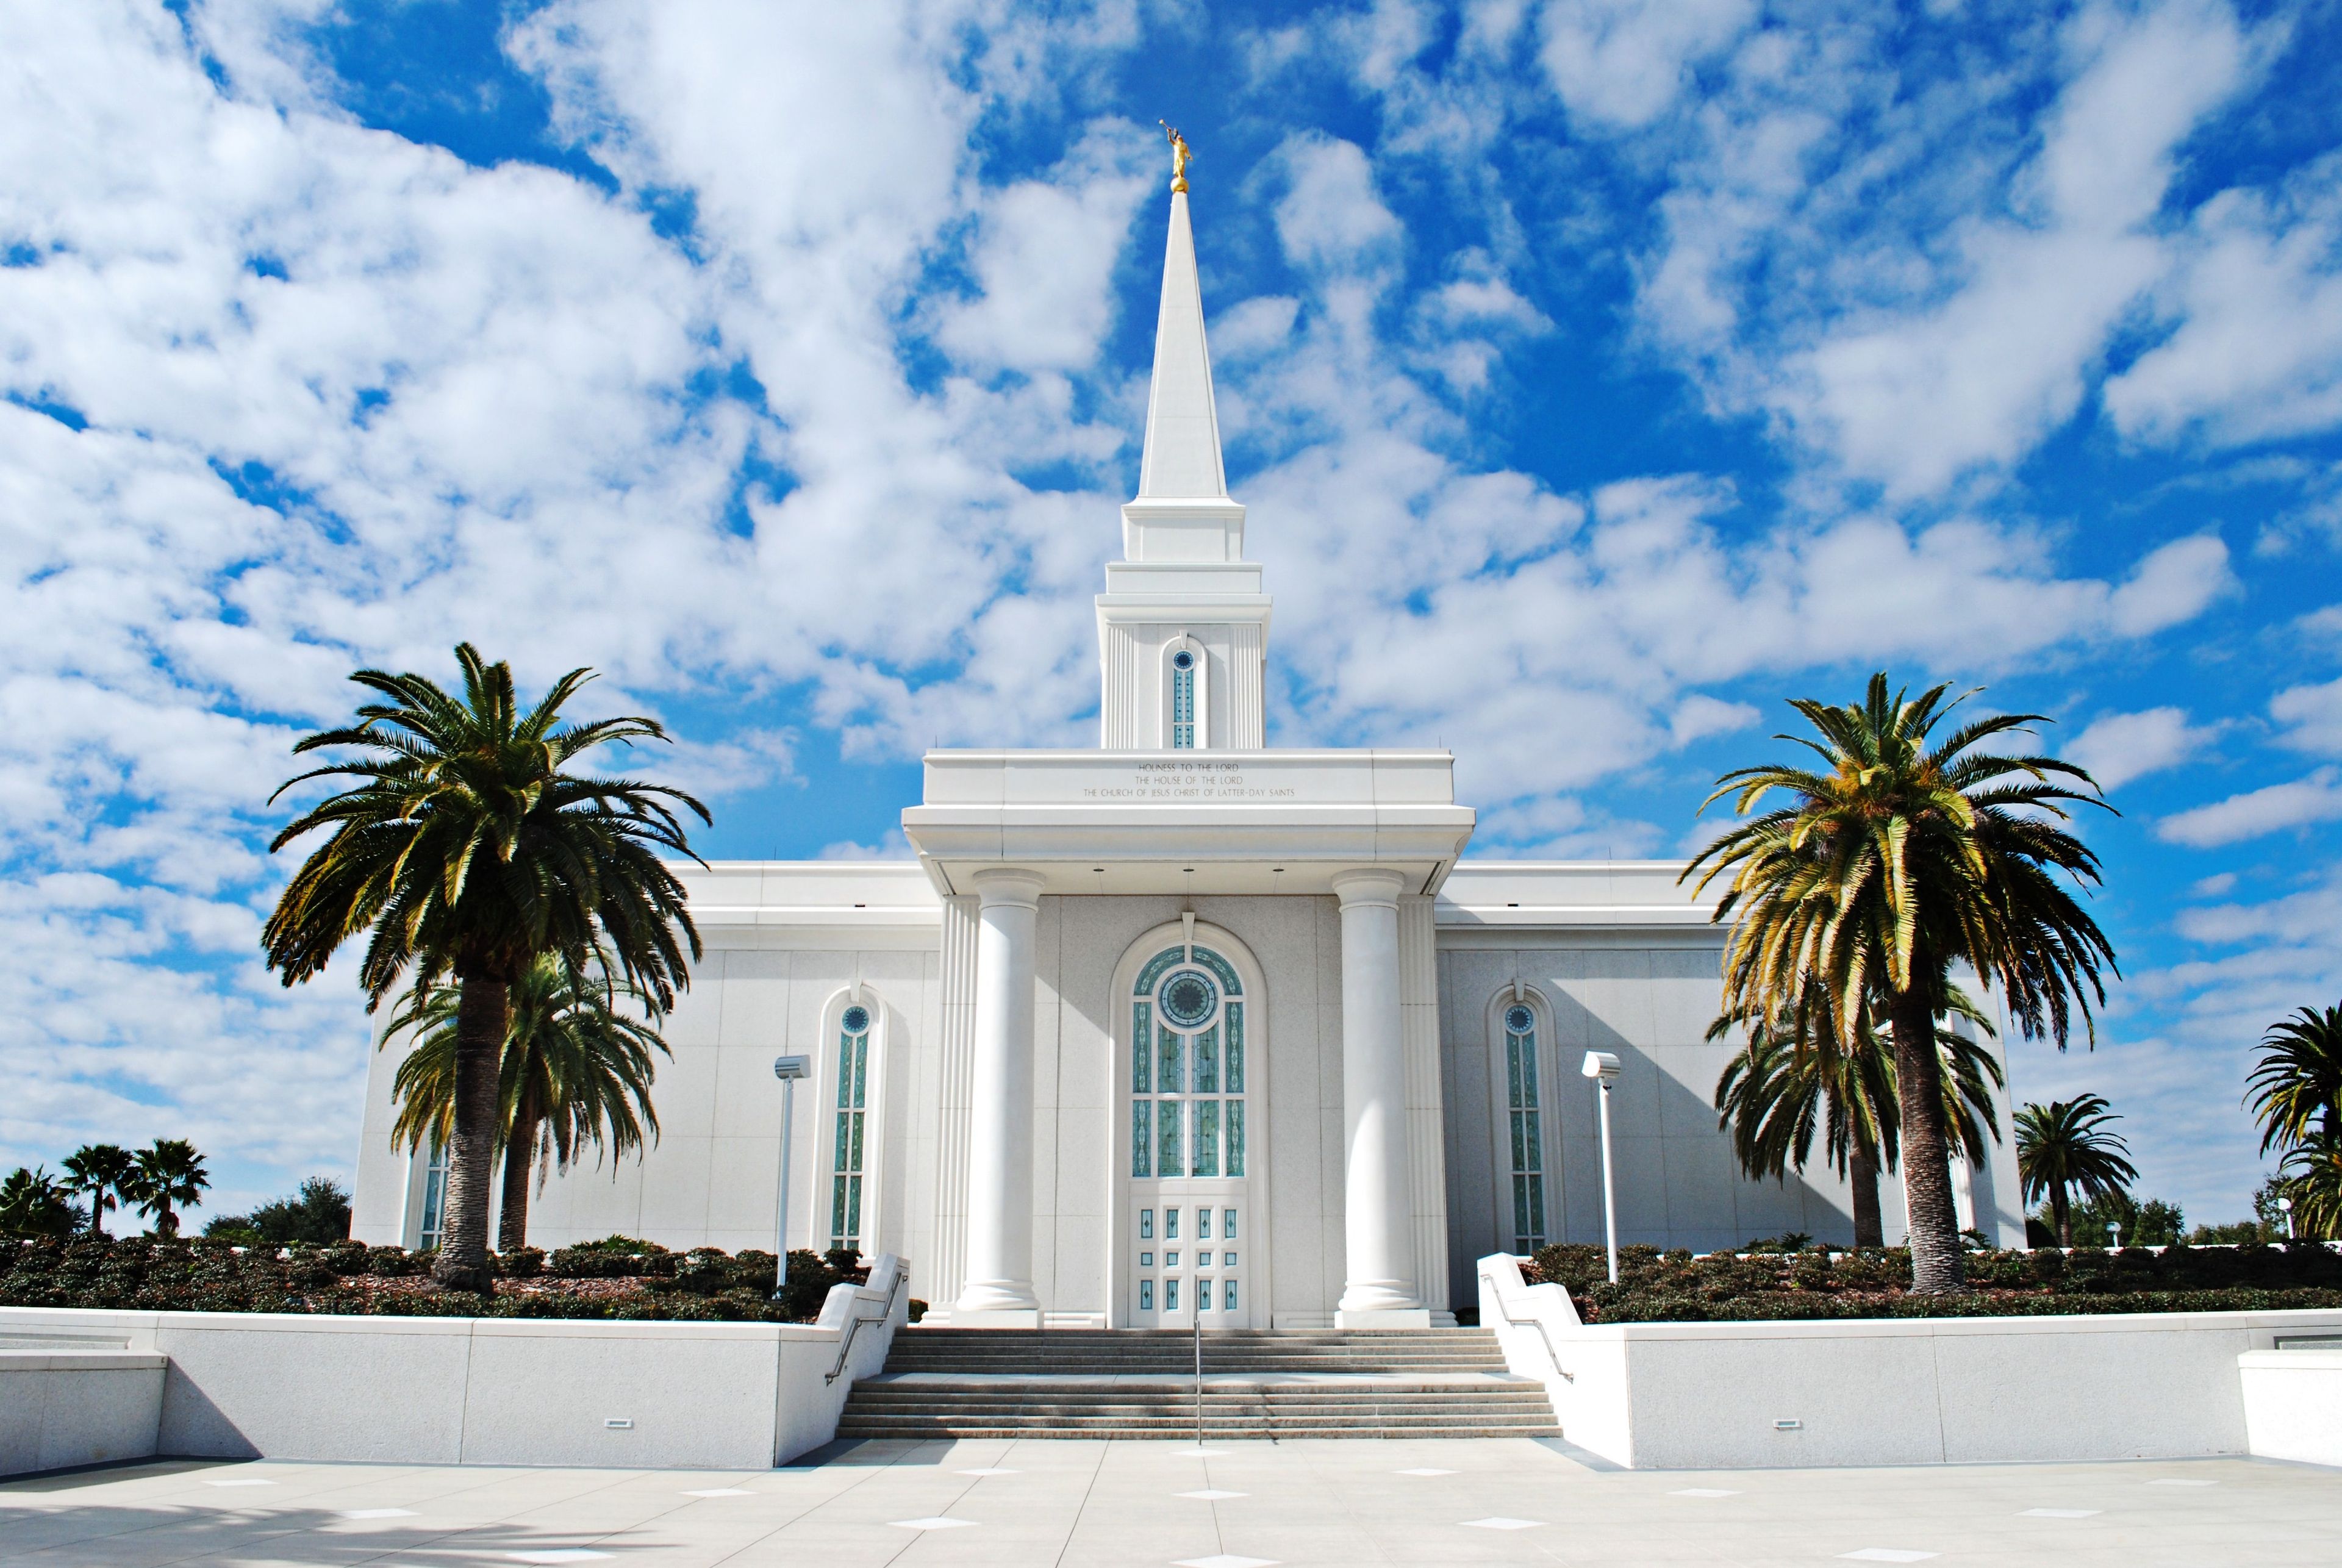 The entire Orlando Florida Temple, including the entrance and scenery.